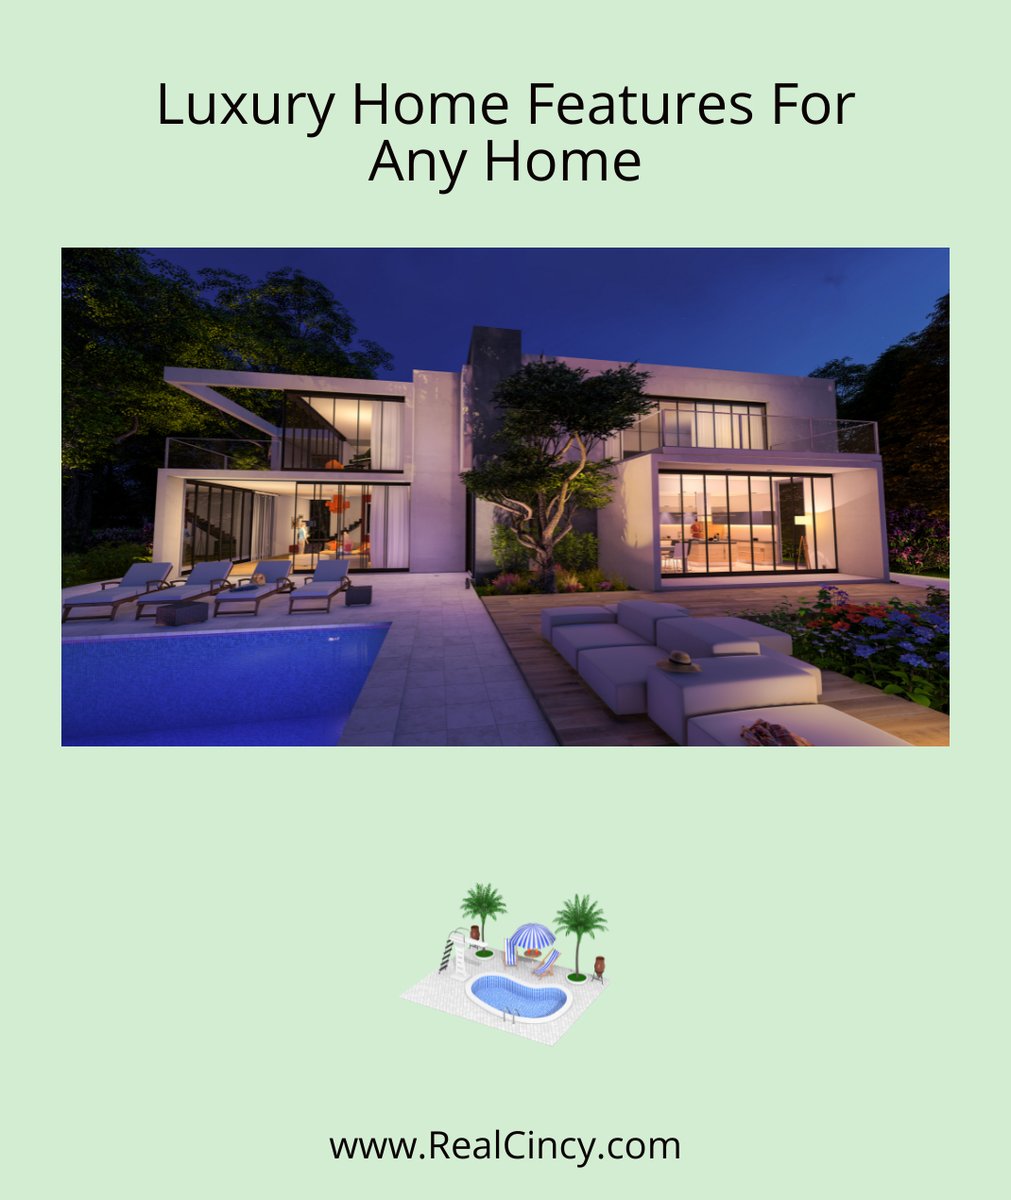 Luxury Home Features For Any Home cincinkyrealestate.com/blog/luxury-ho… Cincinnati & Northern Kentucky Real Estate